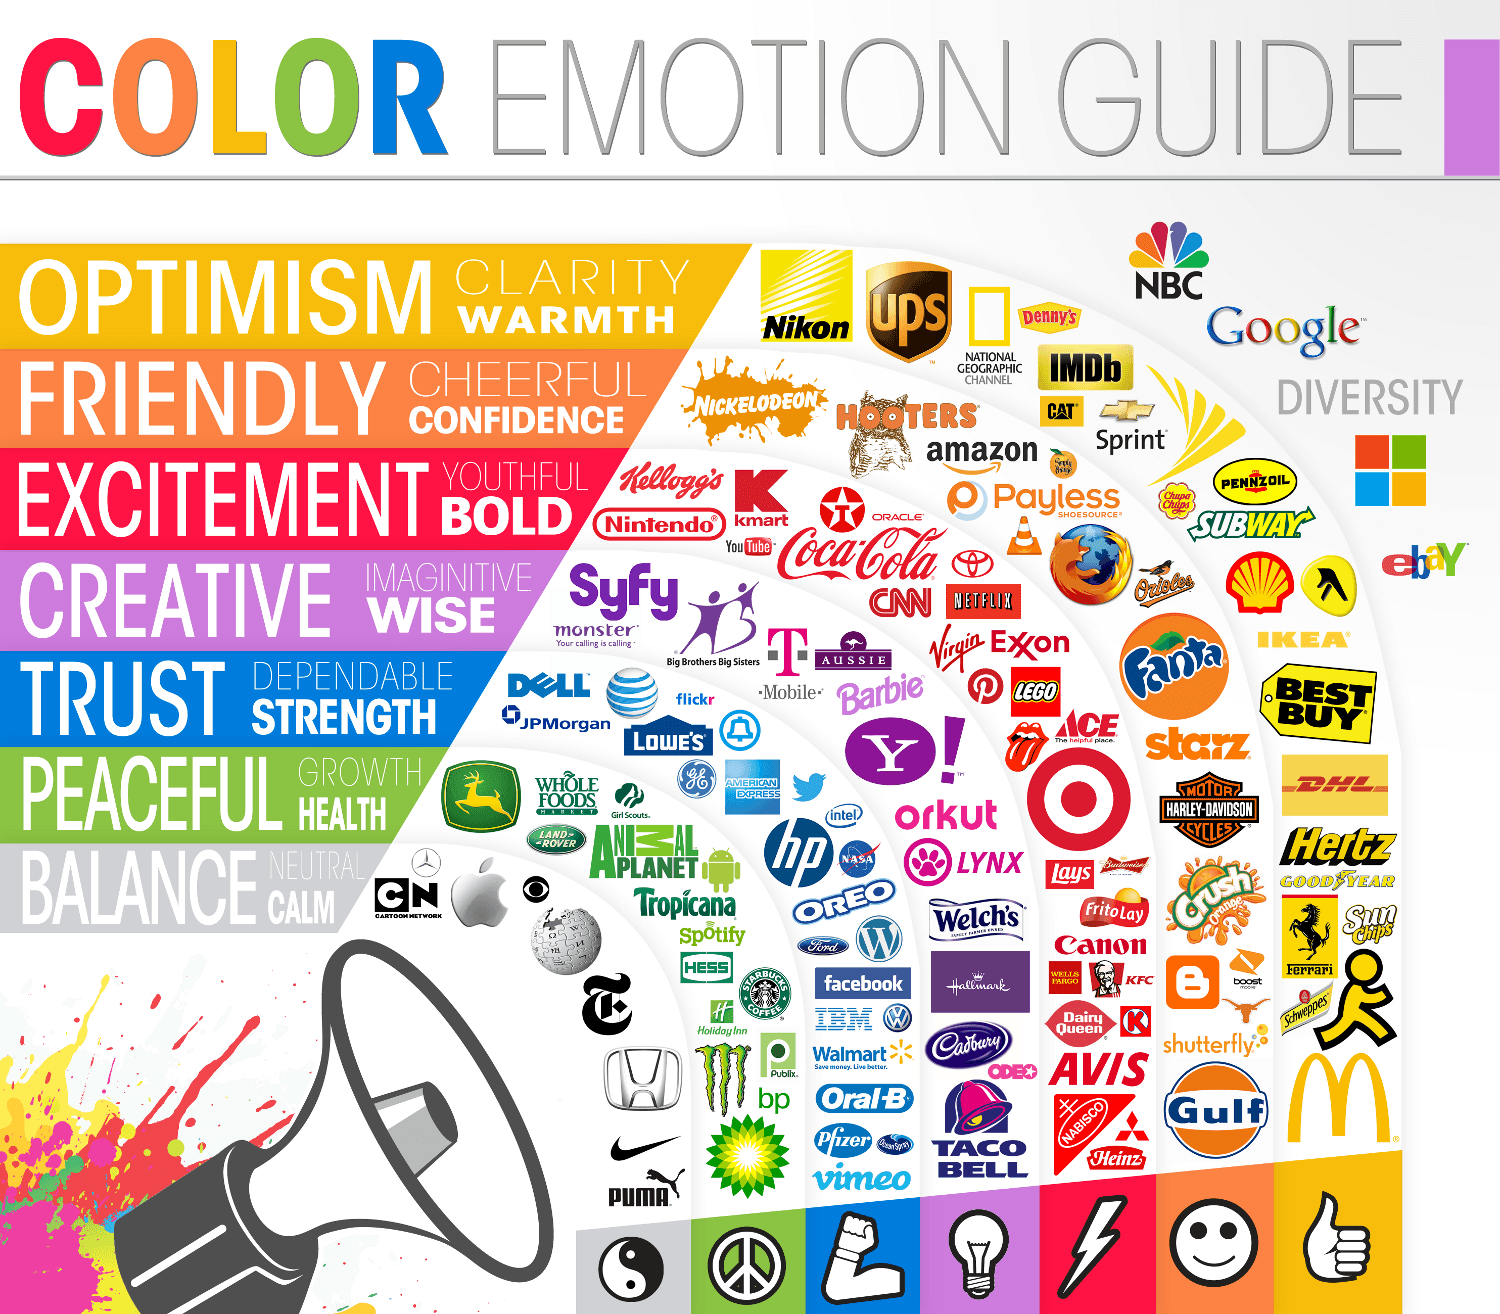 Eye Shape and a Green Square Logo - The Psychology Of Color In Logo Design - The Logo Company